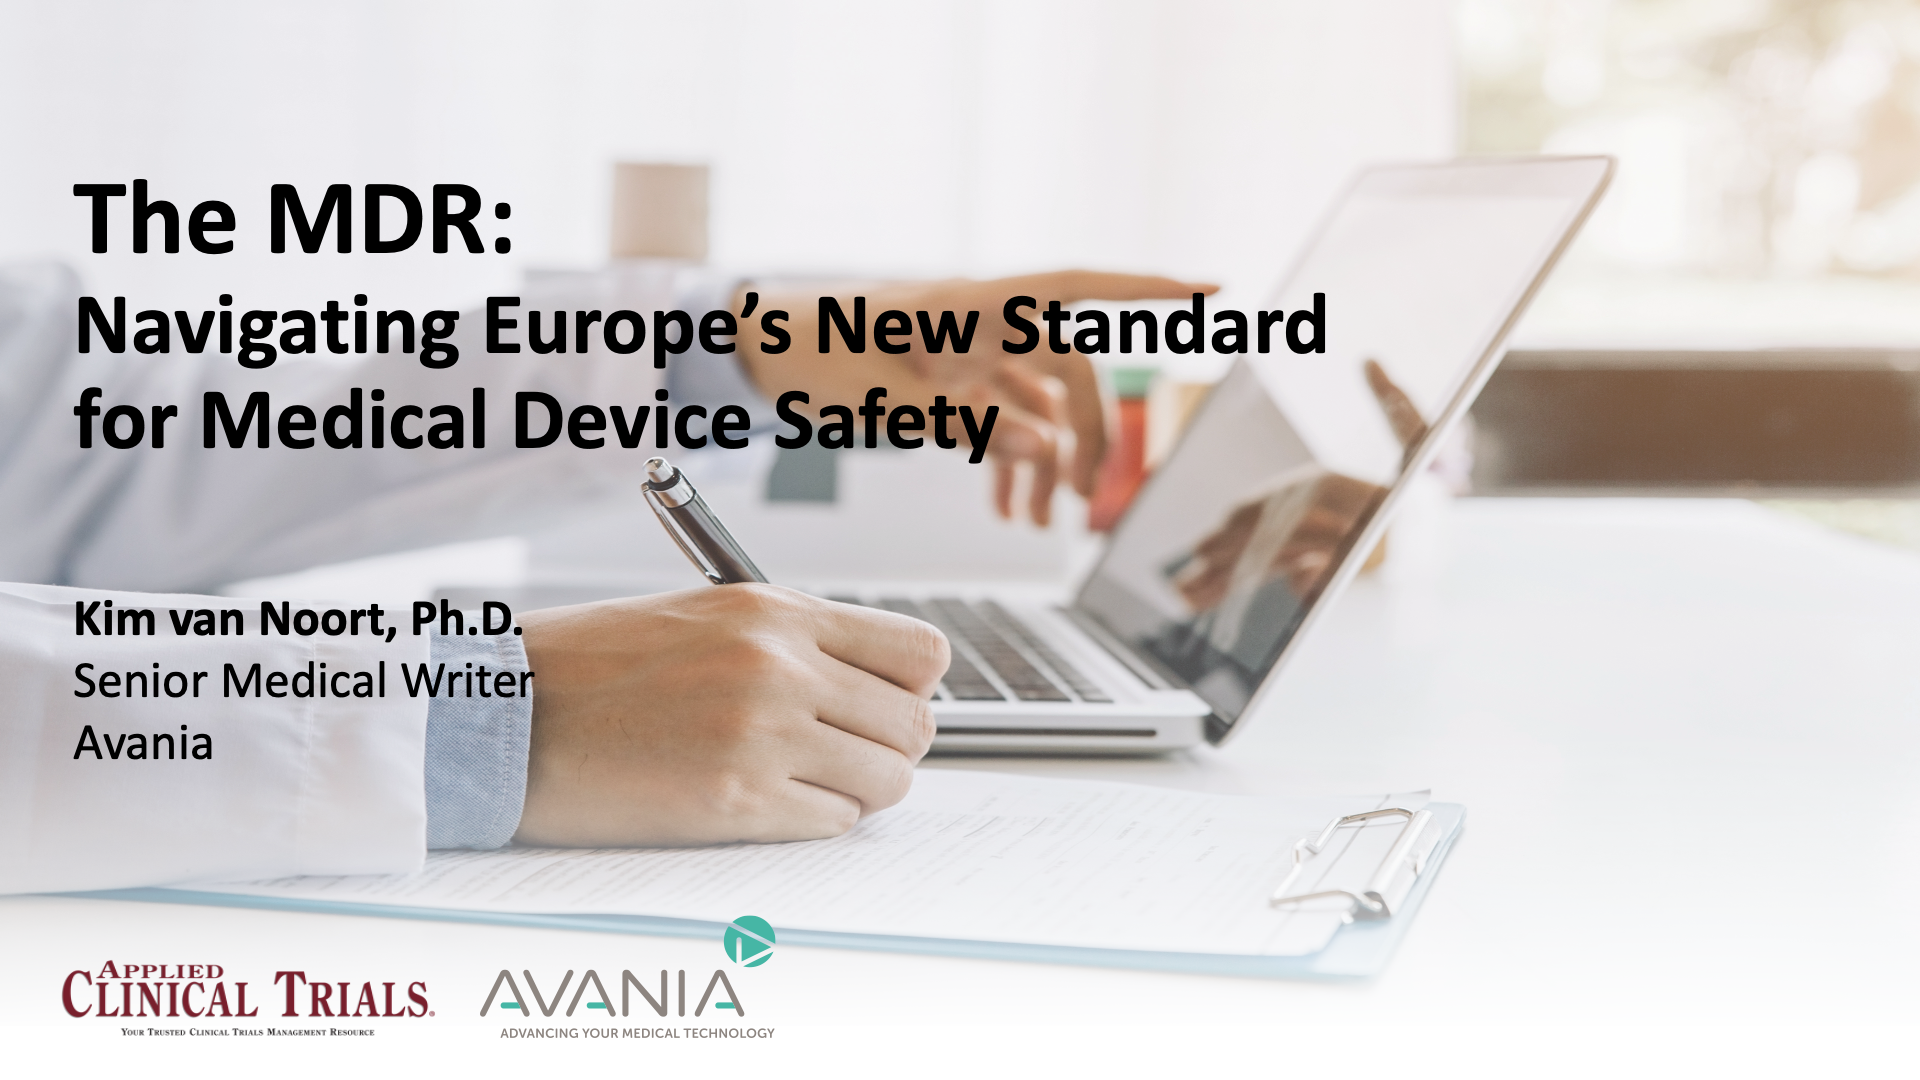 The MDR: Navigating Europe’s New Standard for Medical Device Safety